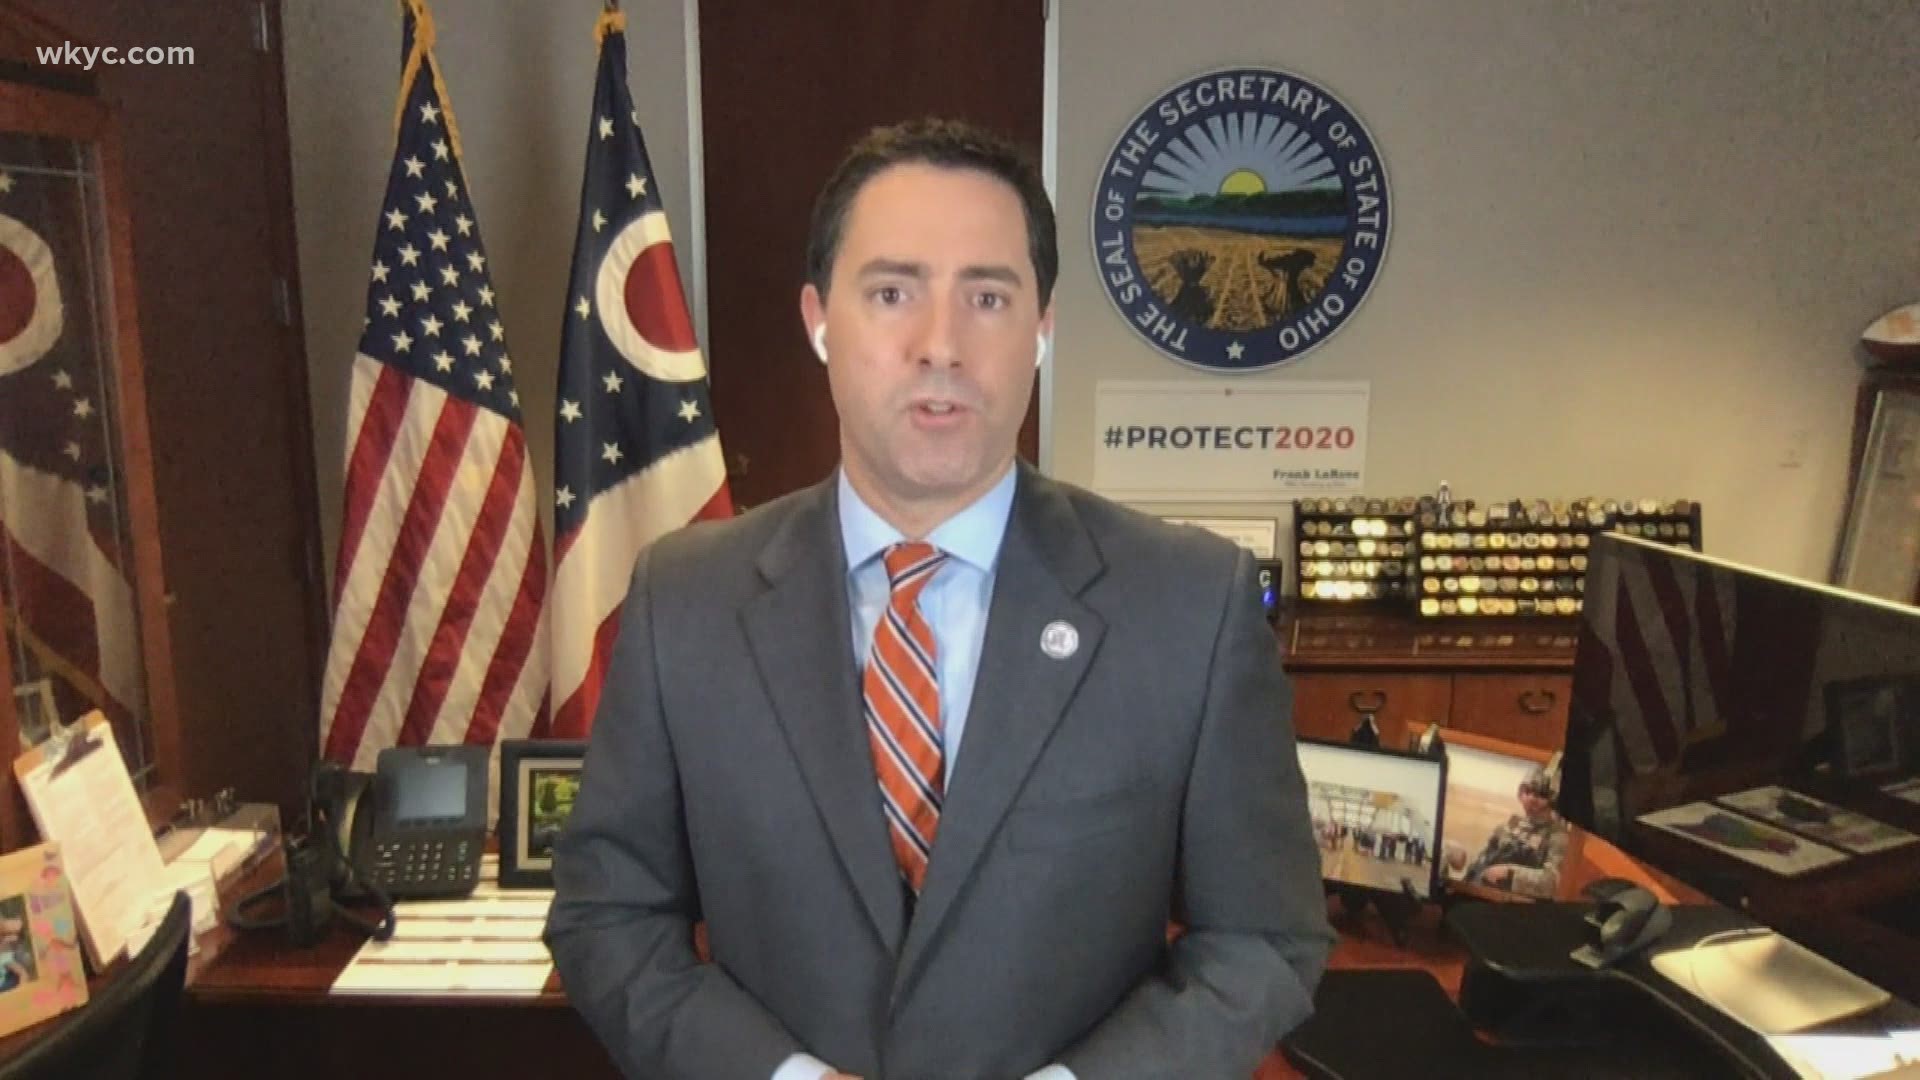 Here's when Ohio Secretary of State Frank LaRose predicts election